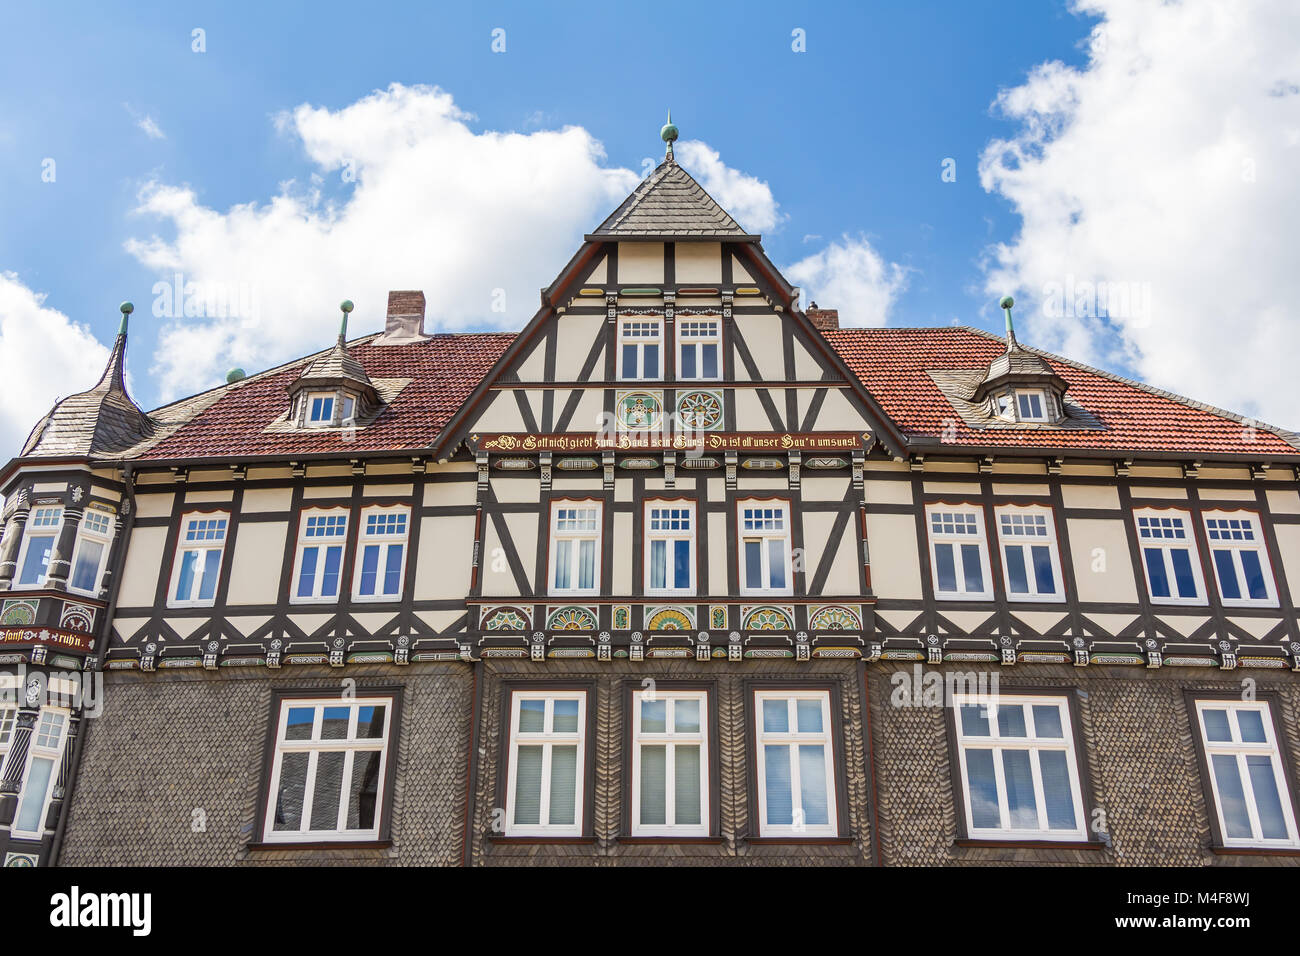 Traditional half-timbered house construction Stock Photo